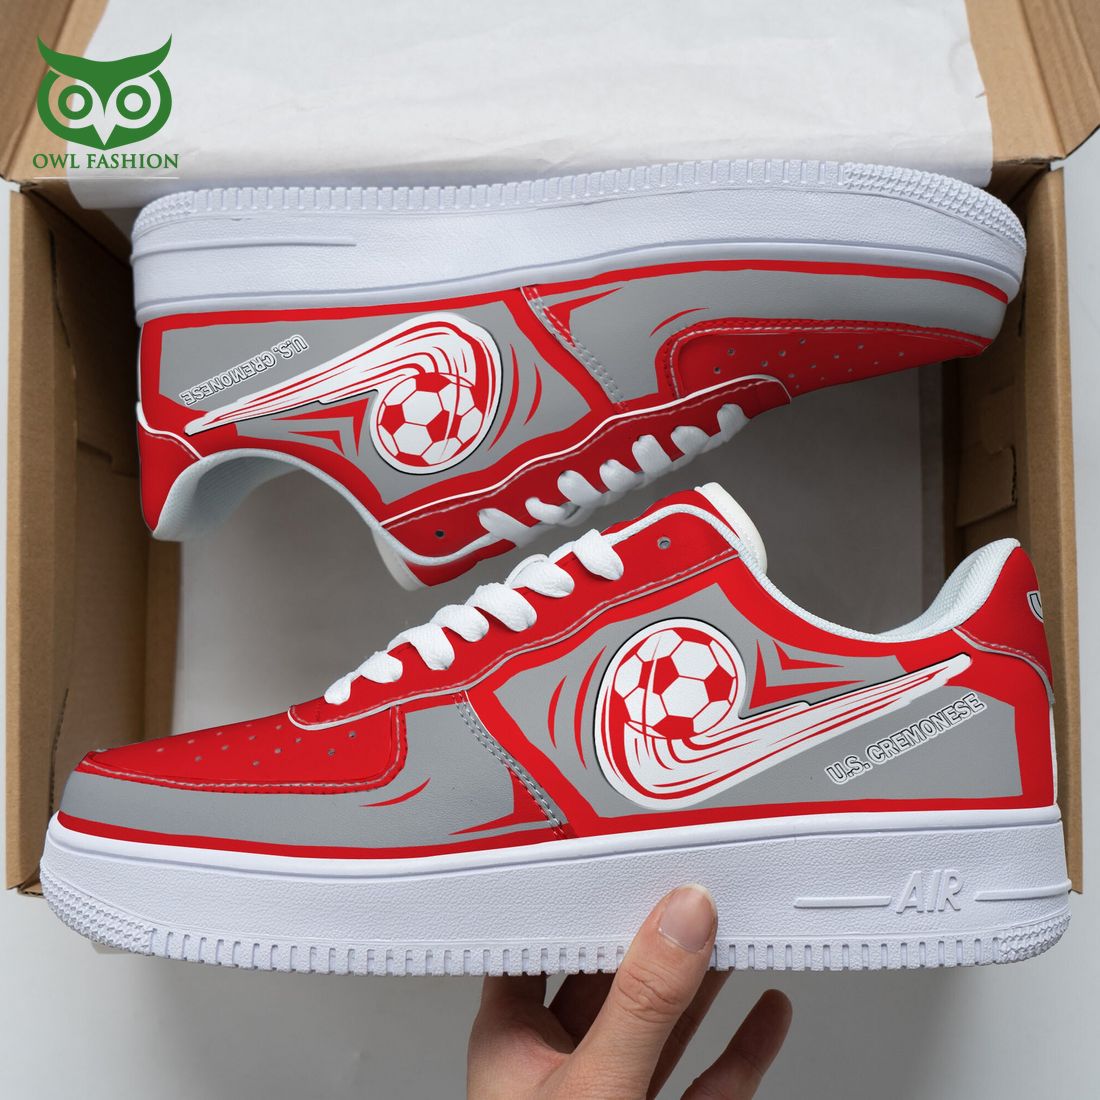 u s cremonese serie a naf air force 1 shoes 1 bYj7m